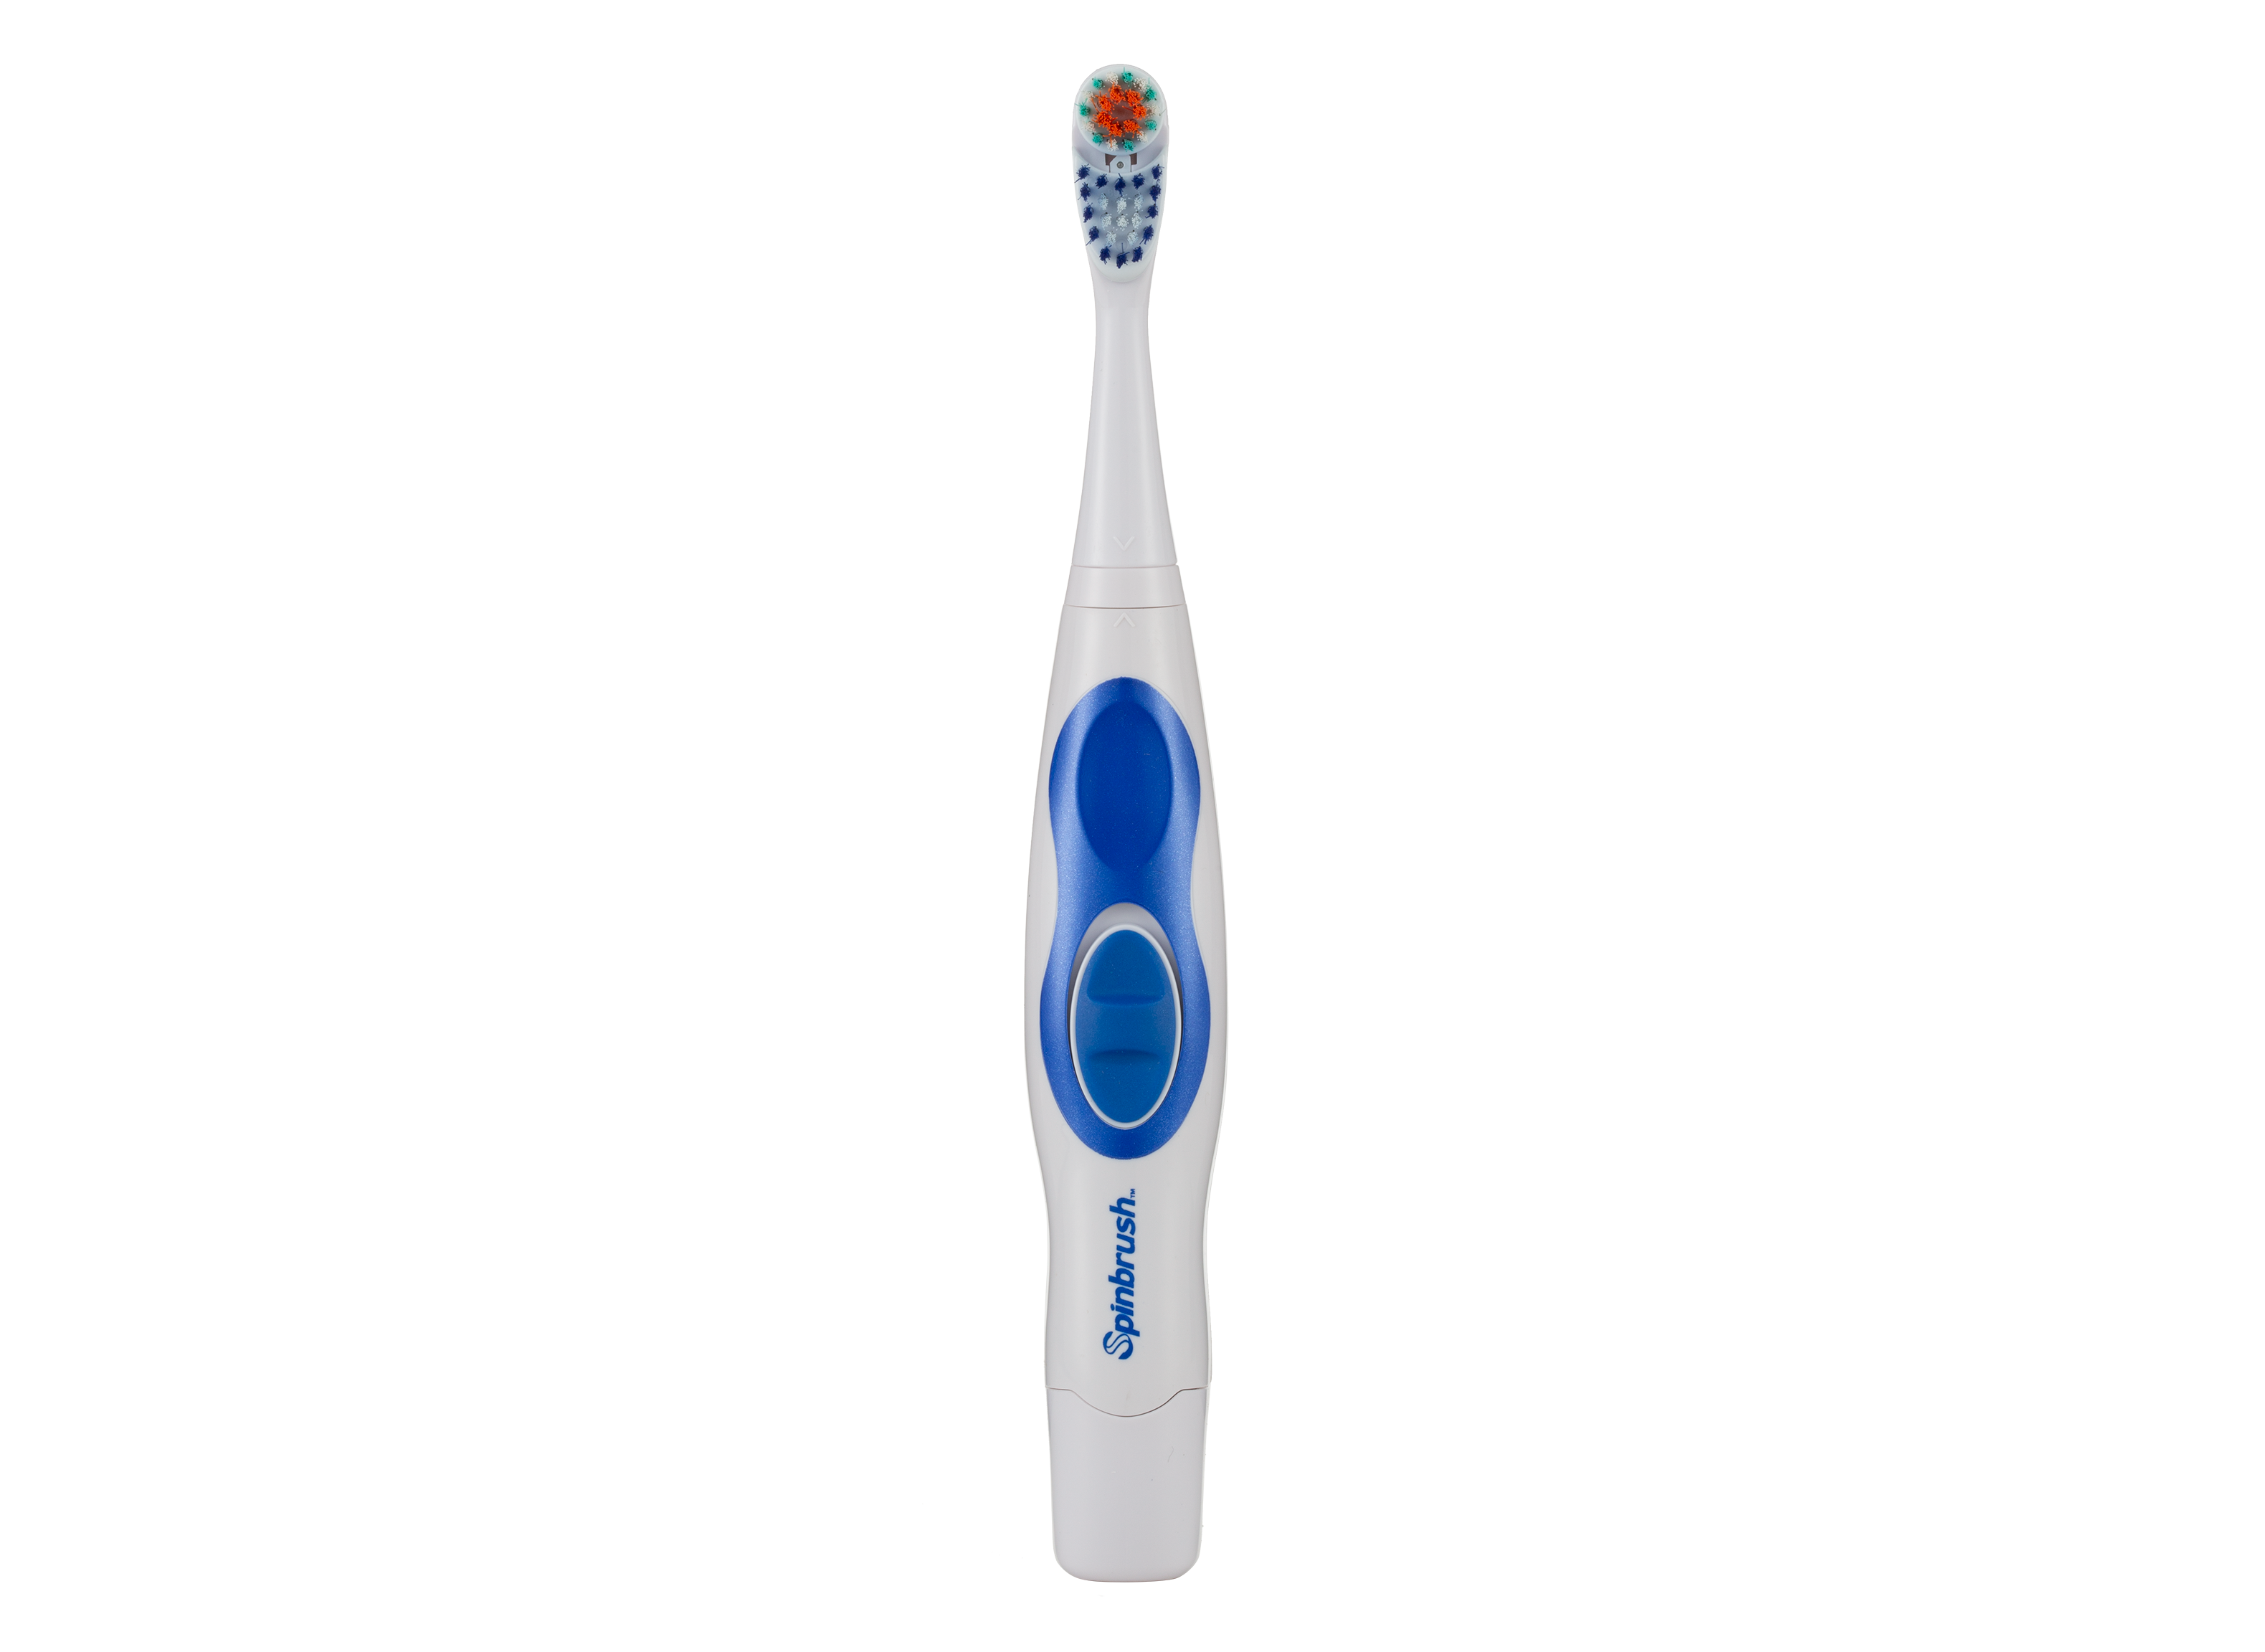 SpinBrush by Arm & Hammer Pro Clean Powered Toothbrush Soft